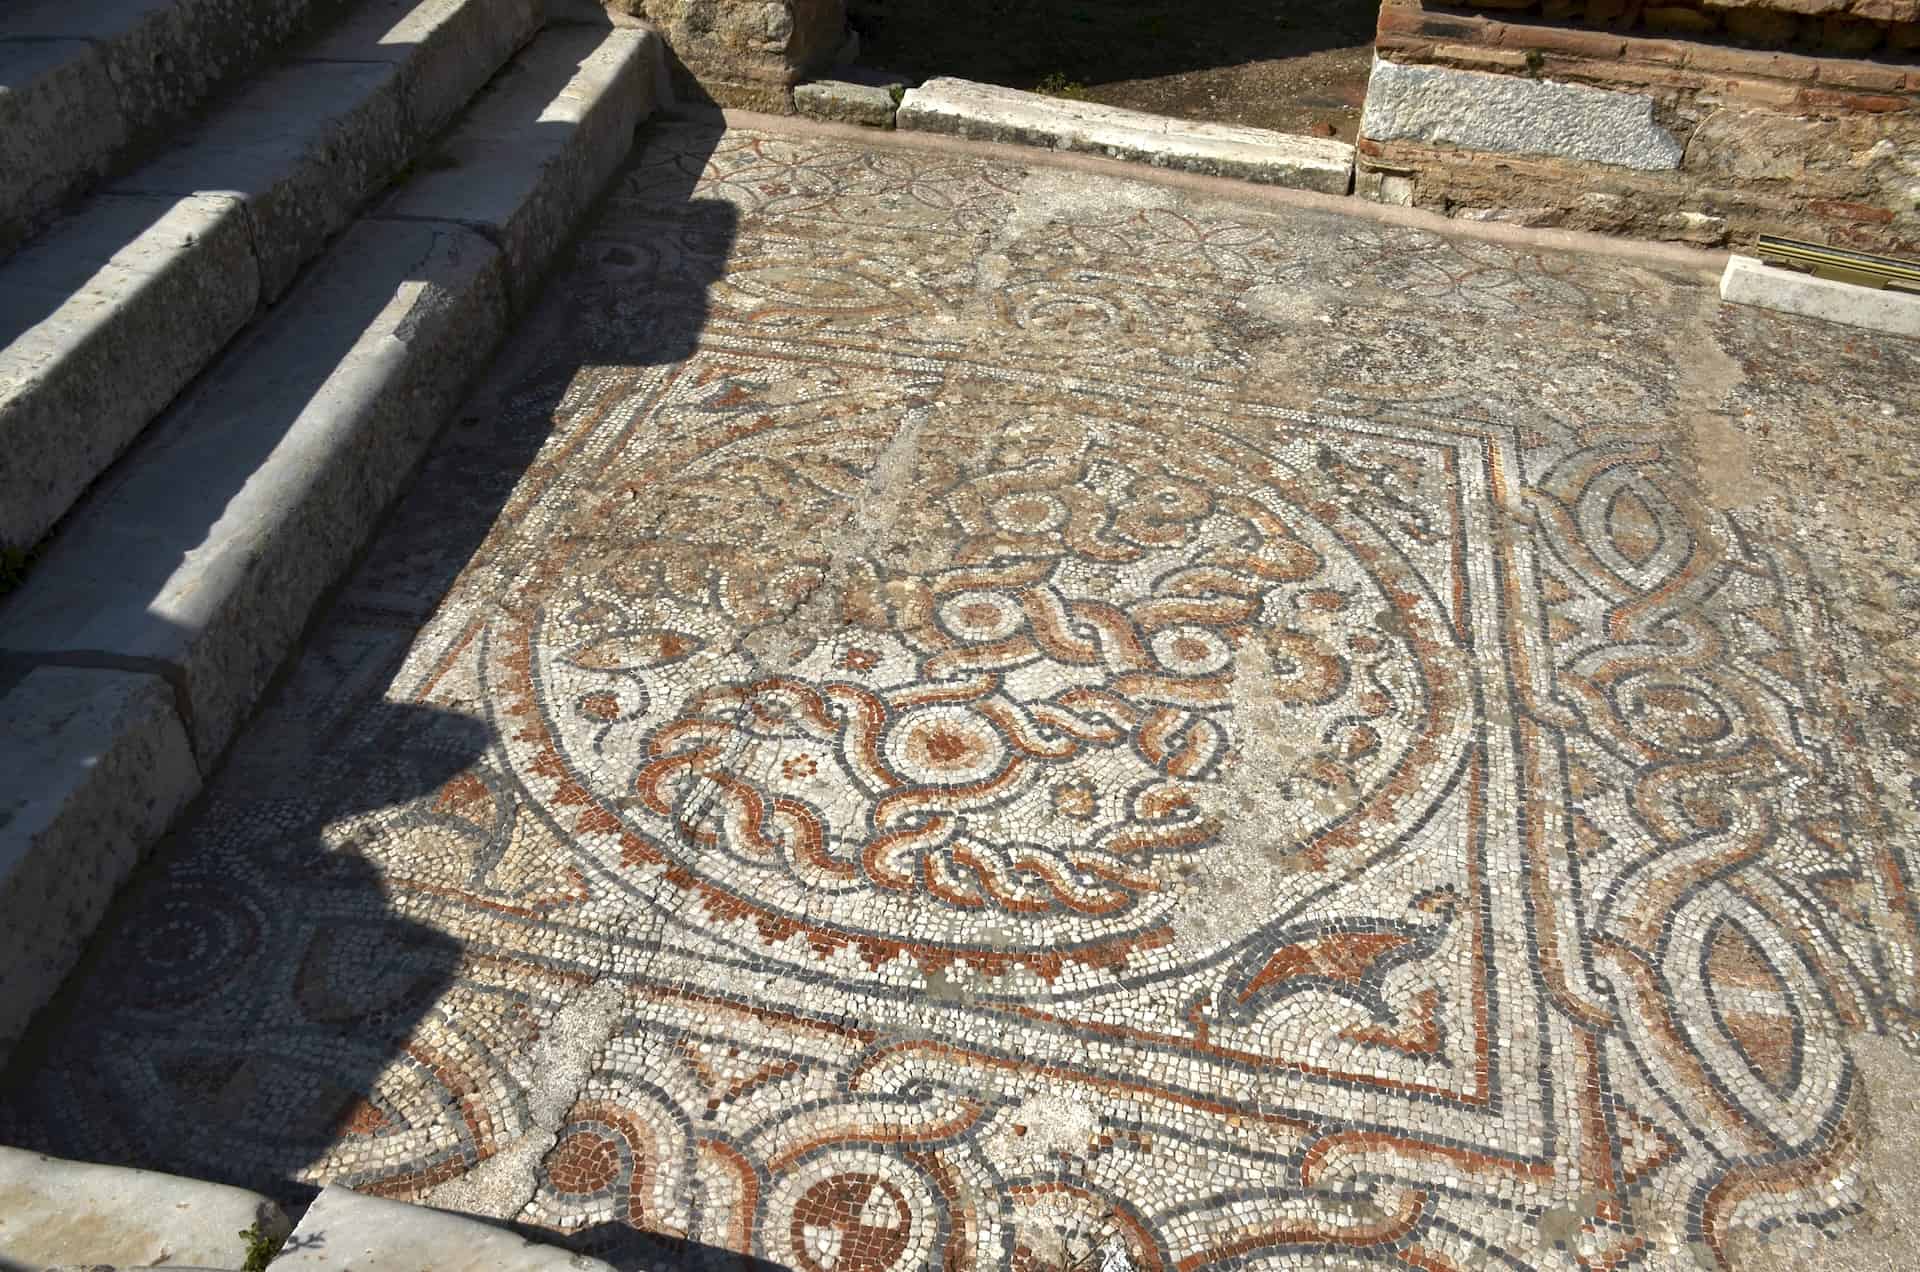 Upper end of the mosaic on Alytarch's Stoa on Curetes Street in Ephesus